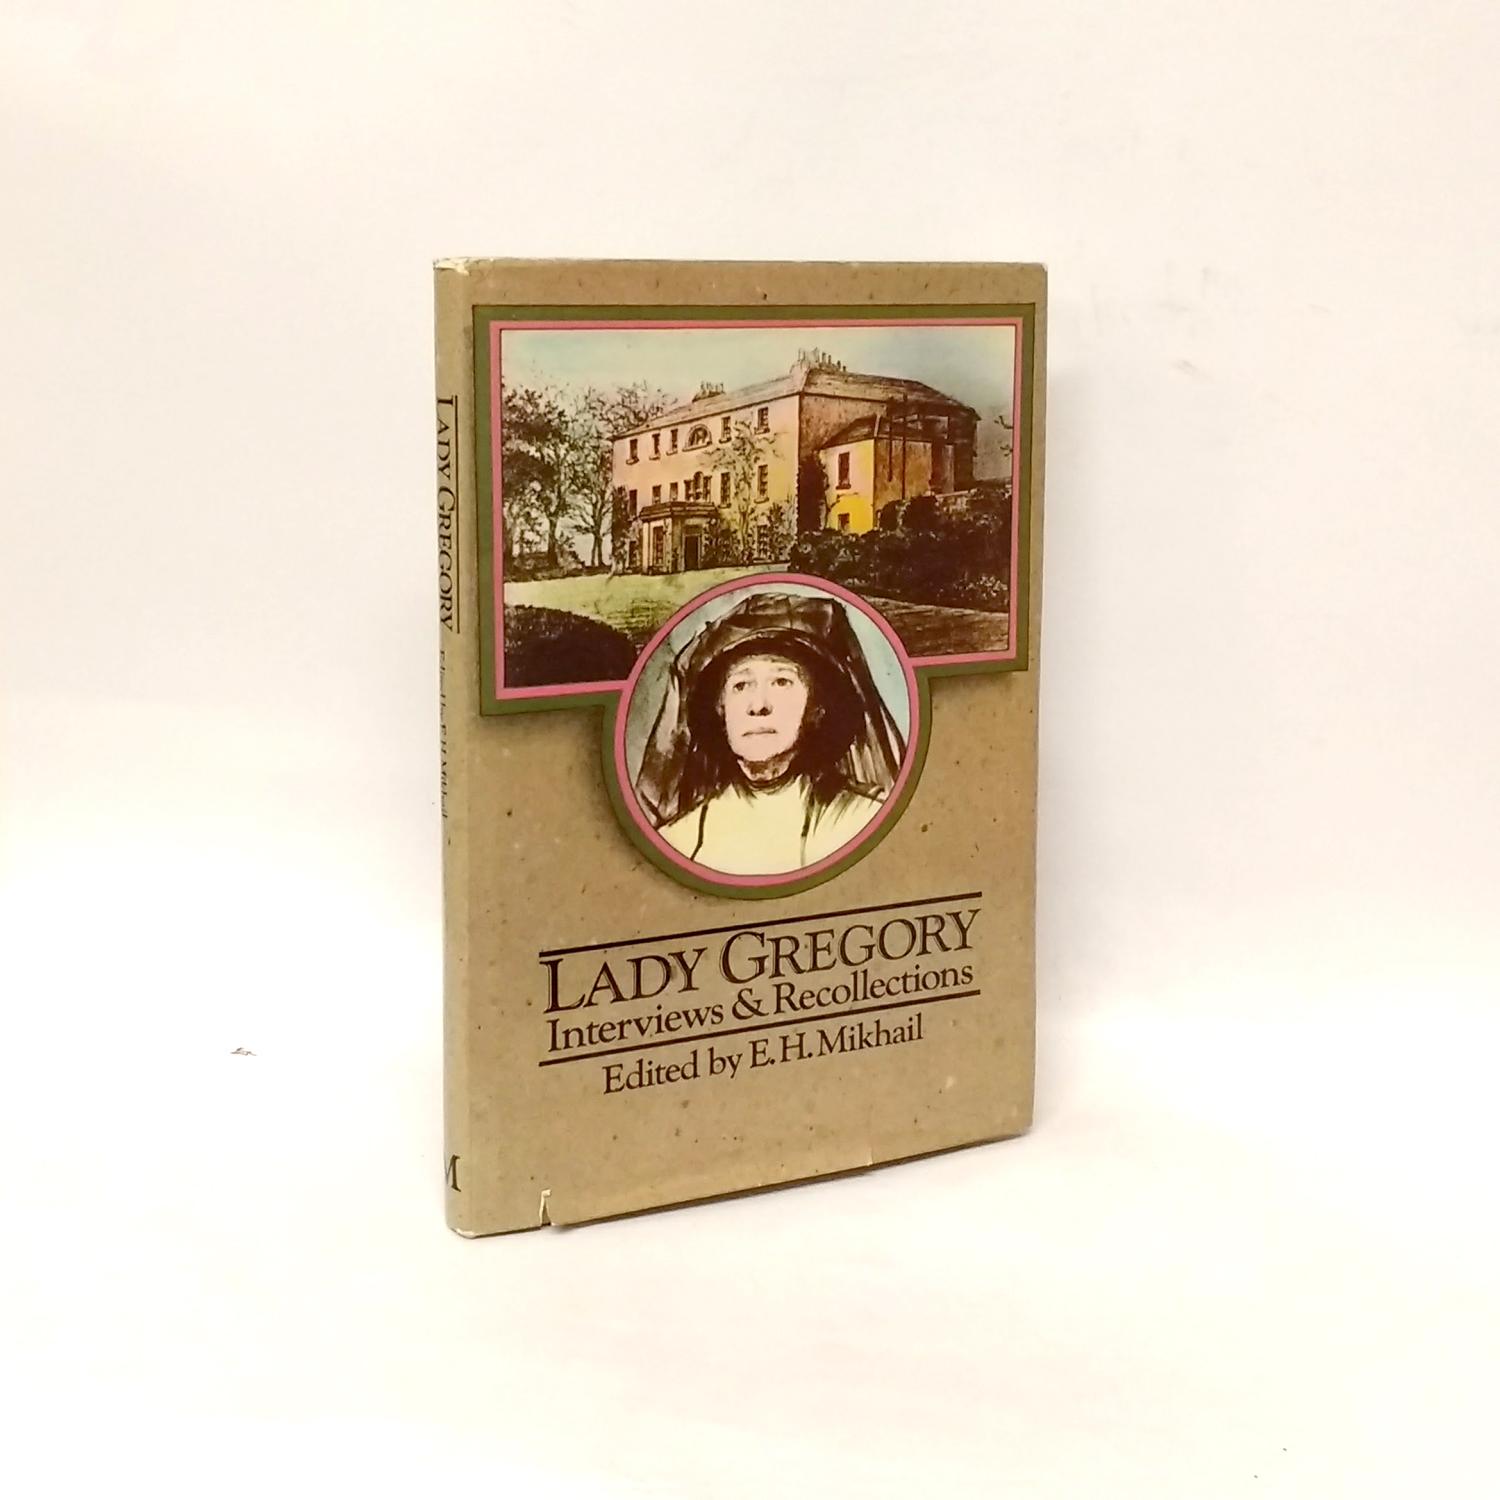 Lady Gregory: Interviews & Recollections - E.H. Mikhail